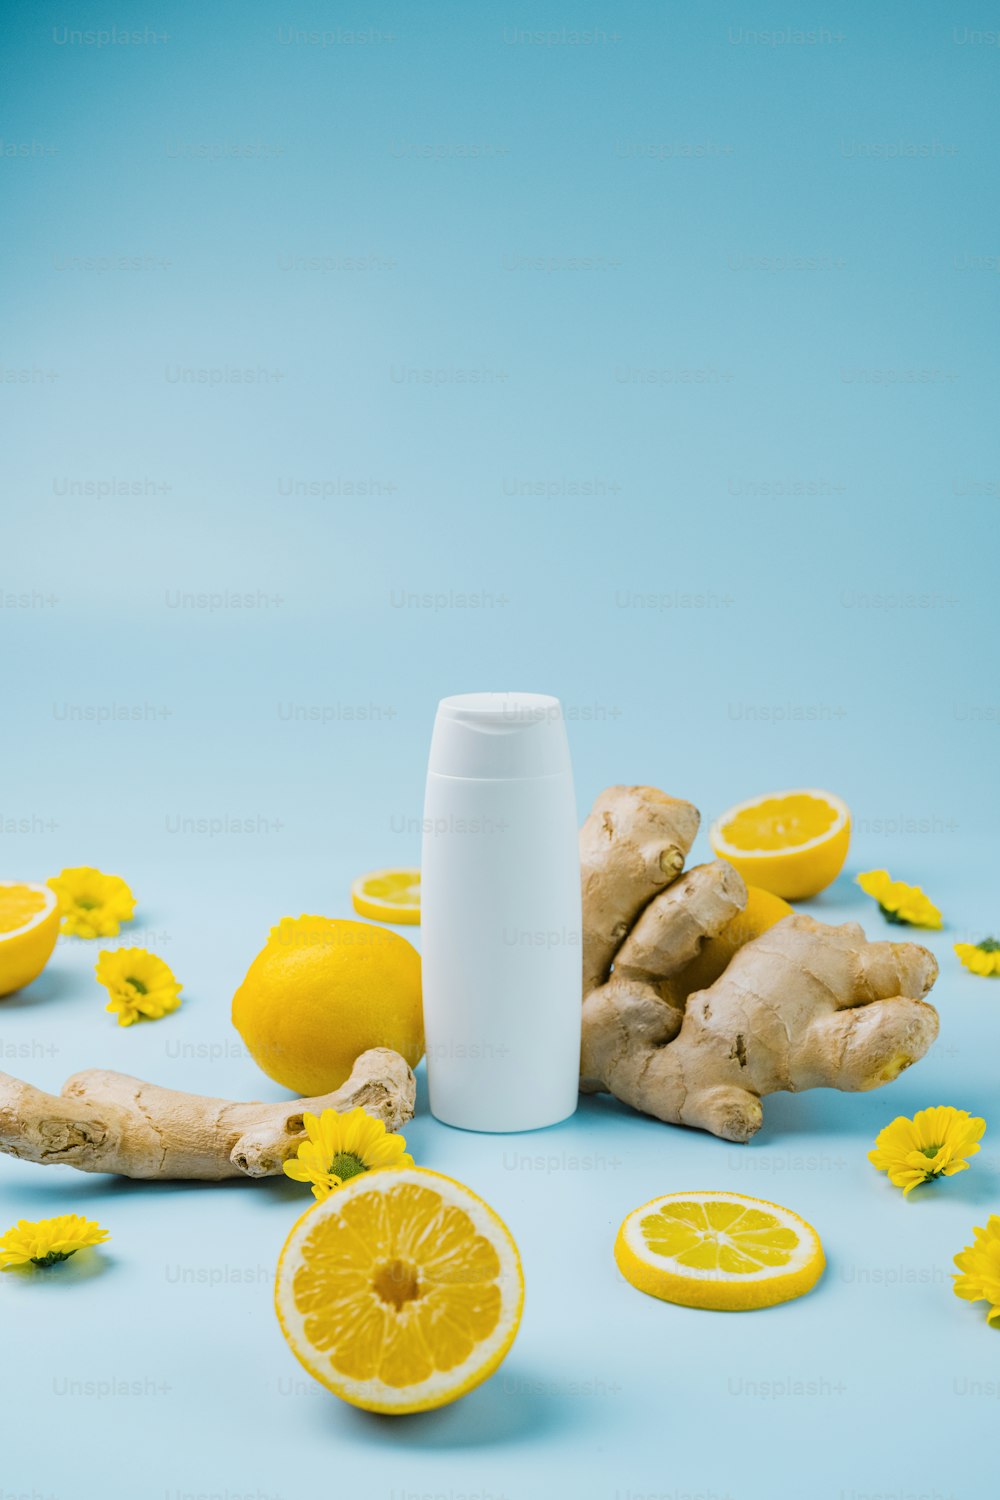 a tube of deodorant surrounded by lemons and ginger